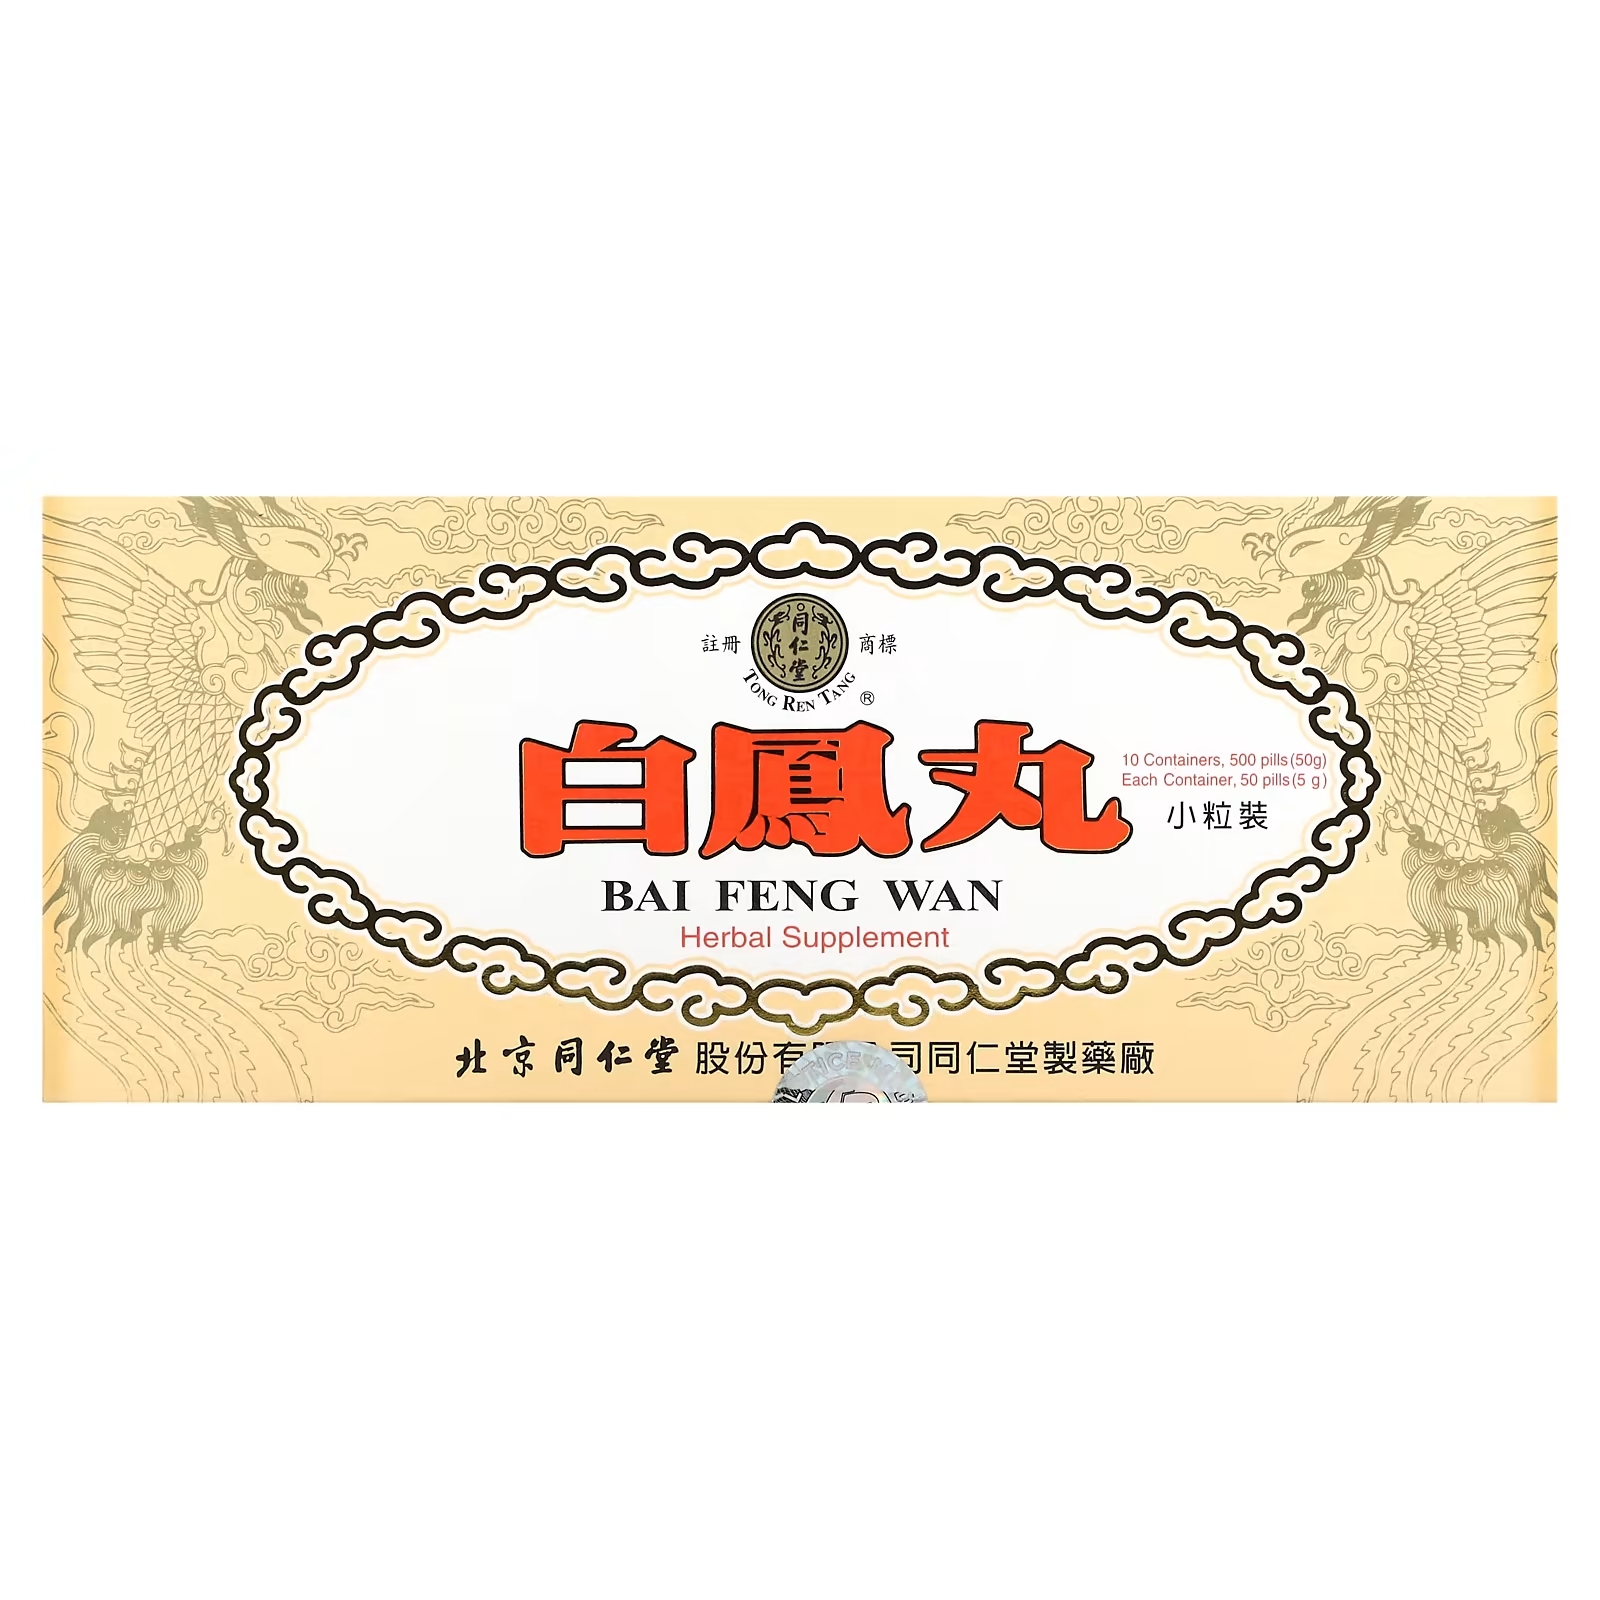 Tong Ren Tang Bai Feng Wan Supports the Health of the Body and Helps Maintain Energy Levels 10 Containers, 500шт tong ren tang shun chi wan supports the health of the nose throat larynx trachea and lungs 300 таблеток